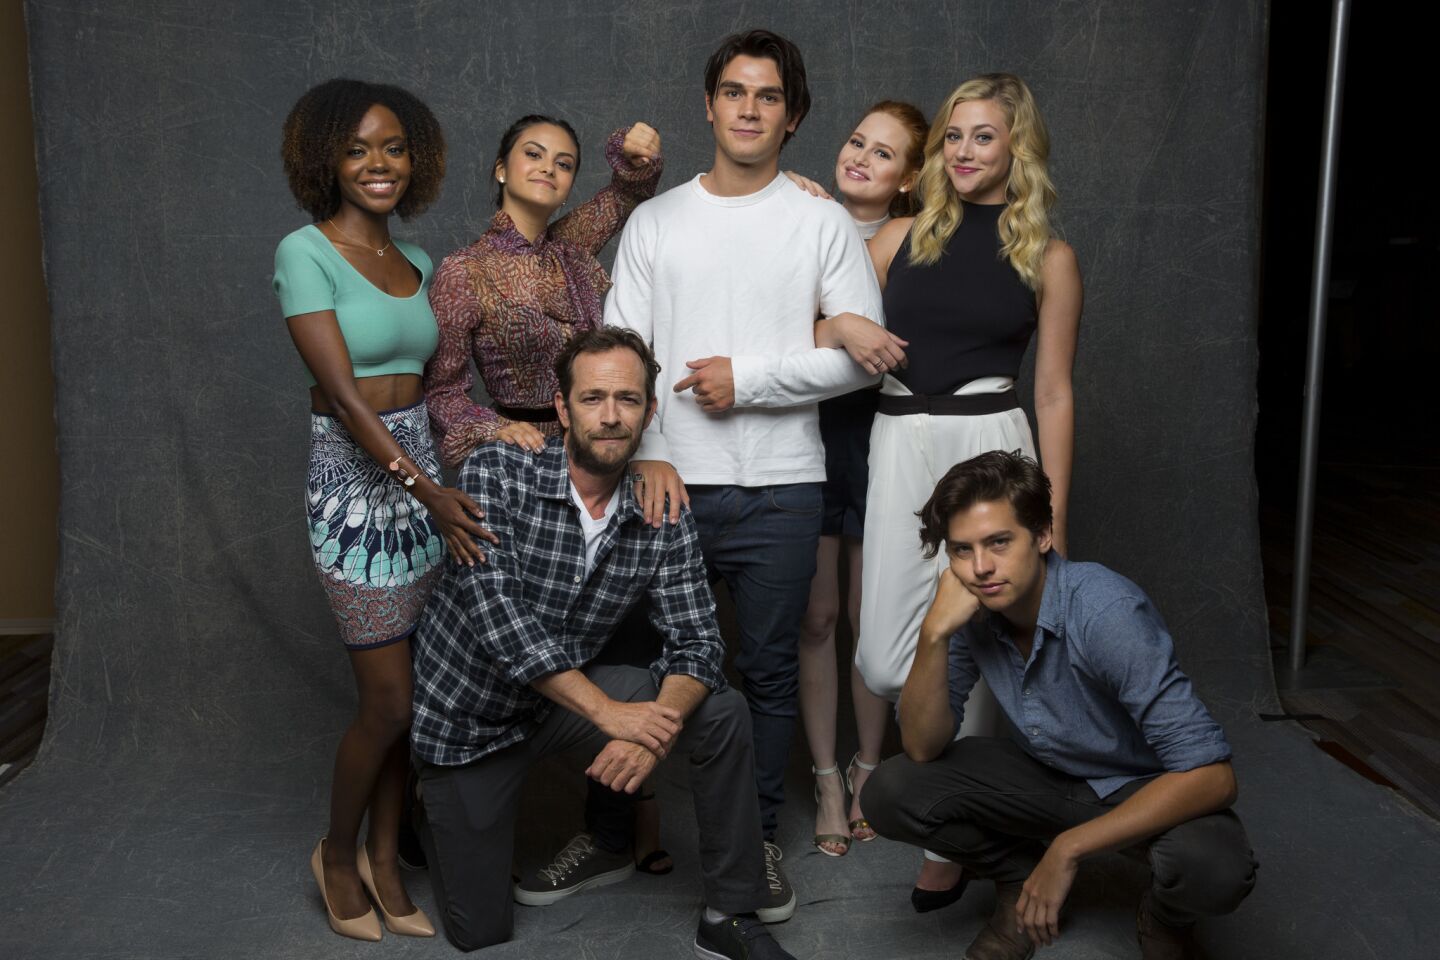 Ashleigh Murray from left, Camilia Mendes, Luke Perry, KJ Apa, Madelaine Petsch, Lili Reinhart and Cole Sprouse of the CW's "Riverdale, " photographed in the L.A. Times Hero Complex photo studio at Comic-Con 2016, in San Diego, July 23, 2016.